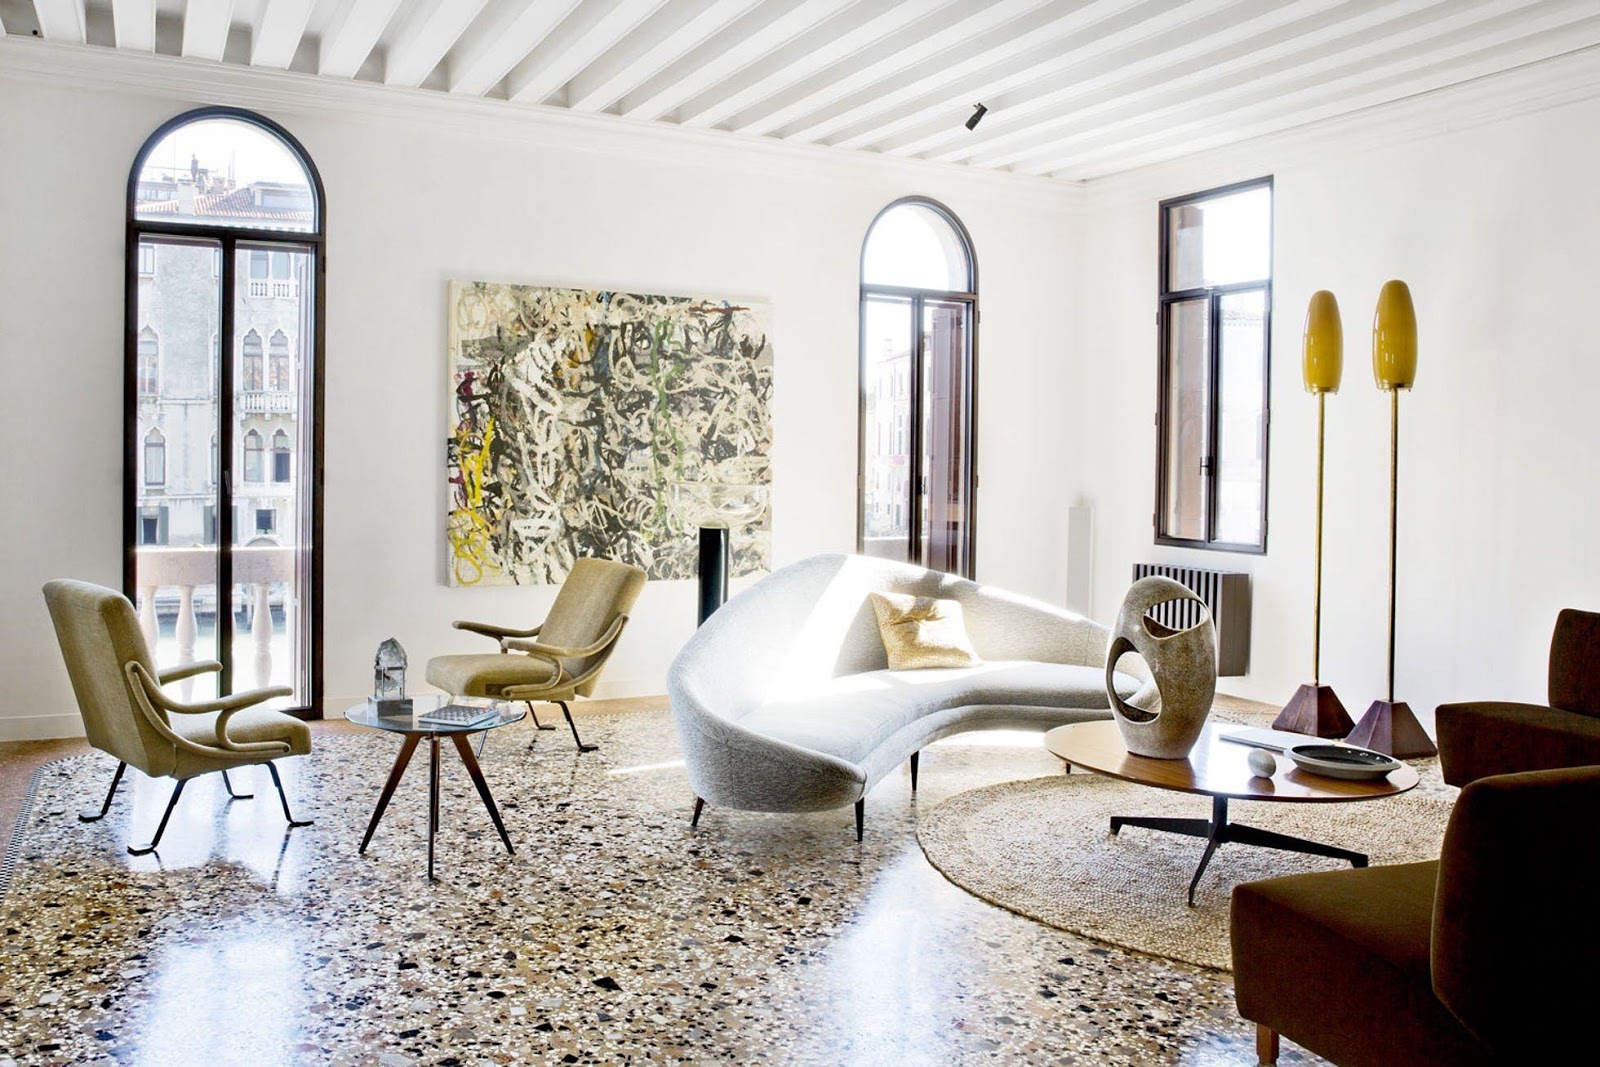 Why Terrazzo Tiles are Trending for Interior Designs